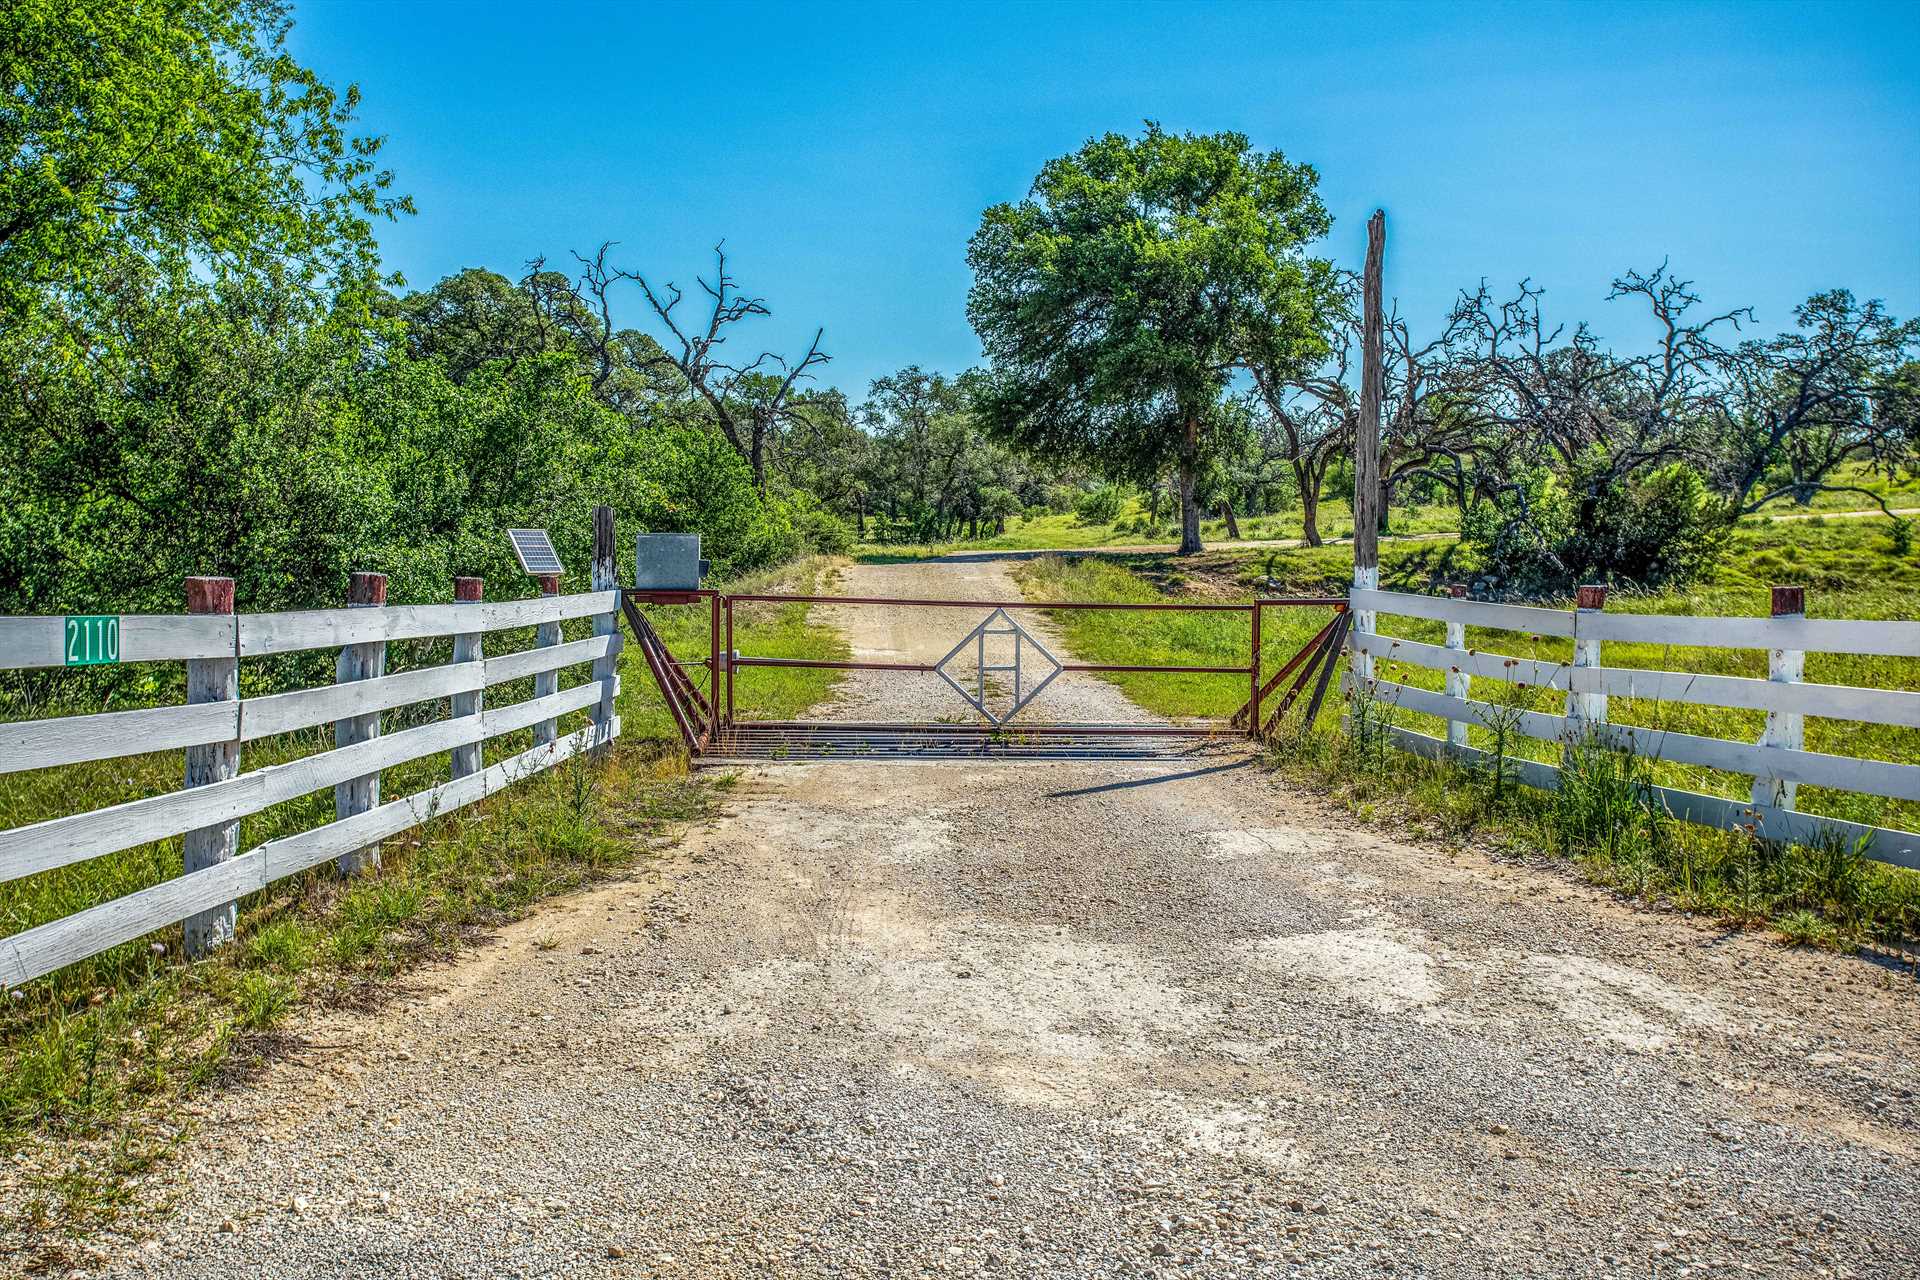                                                 Welcome to our little slice of the Hill Country! We love it when our guests feel at home here.